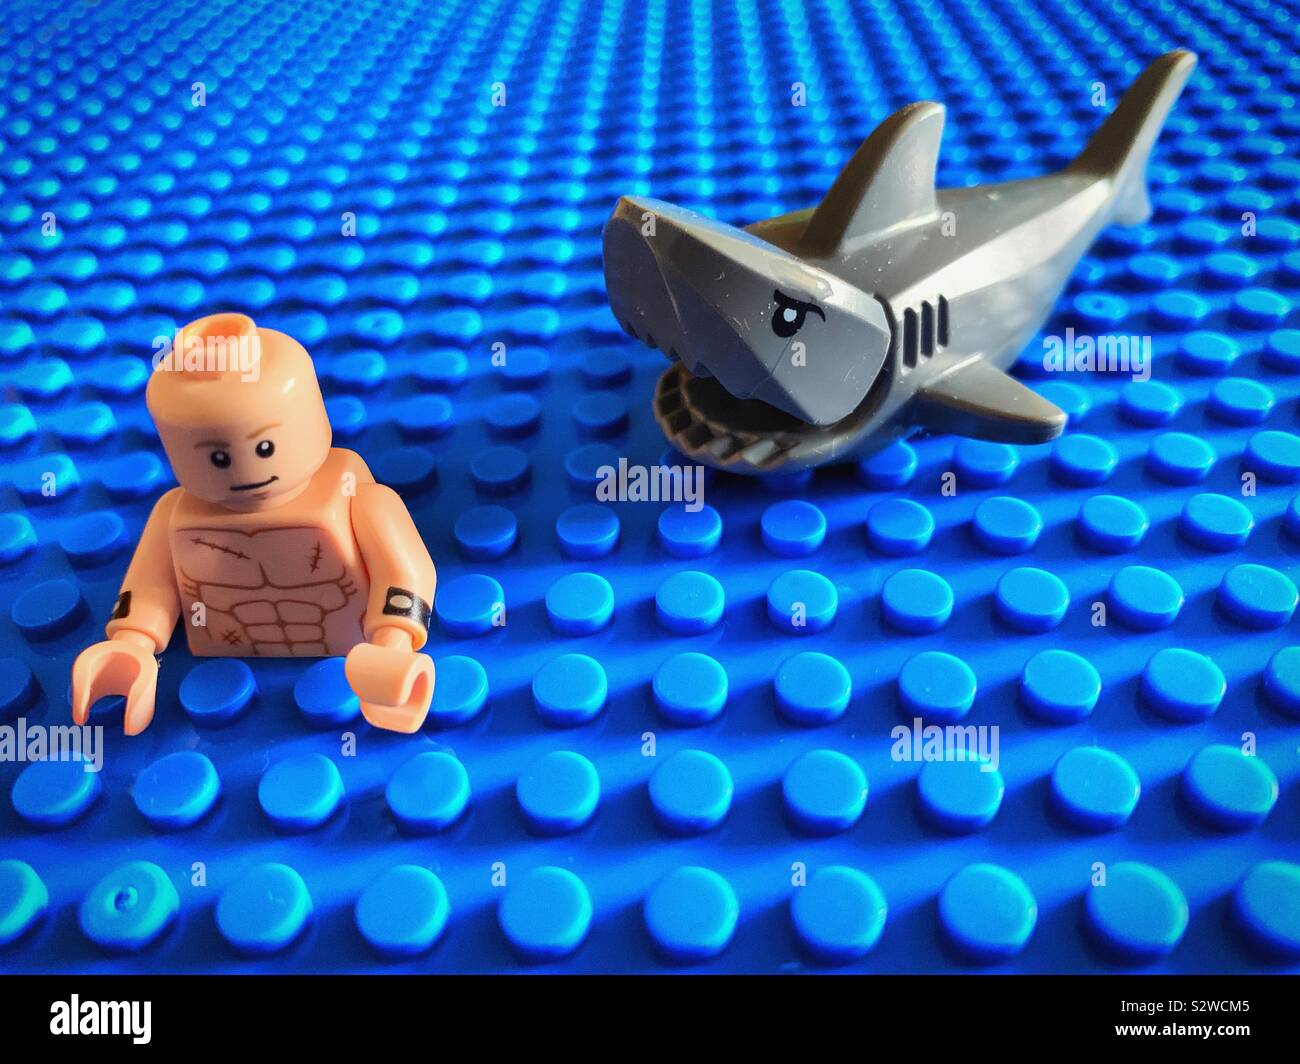 Nuoto in shark acque infestate. Aprire pericoloso nuotare. Mare pericoloso o oceano nuotare. Lego Foto Stock